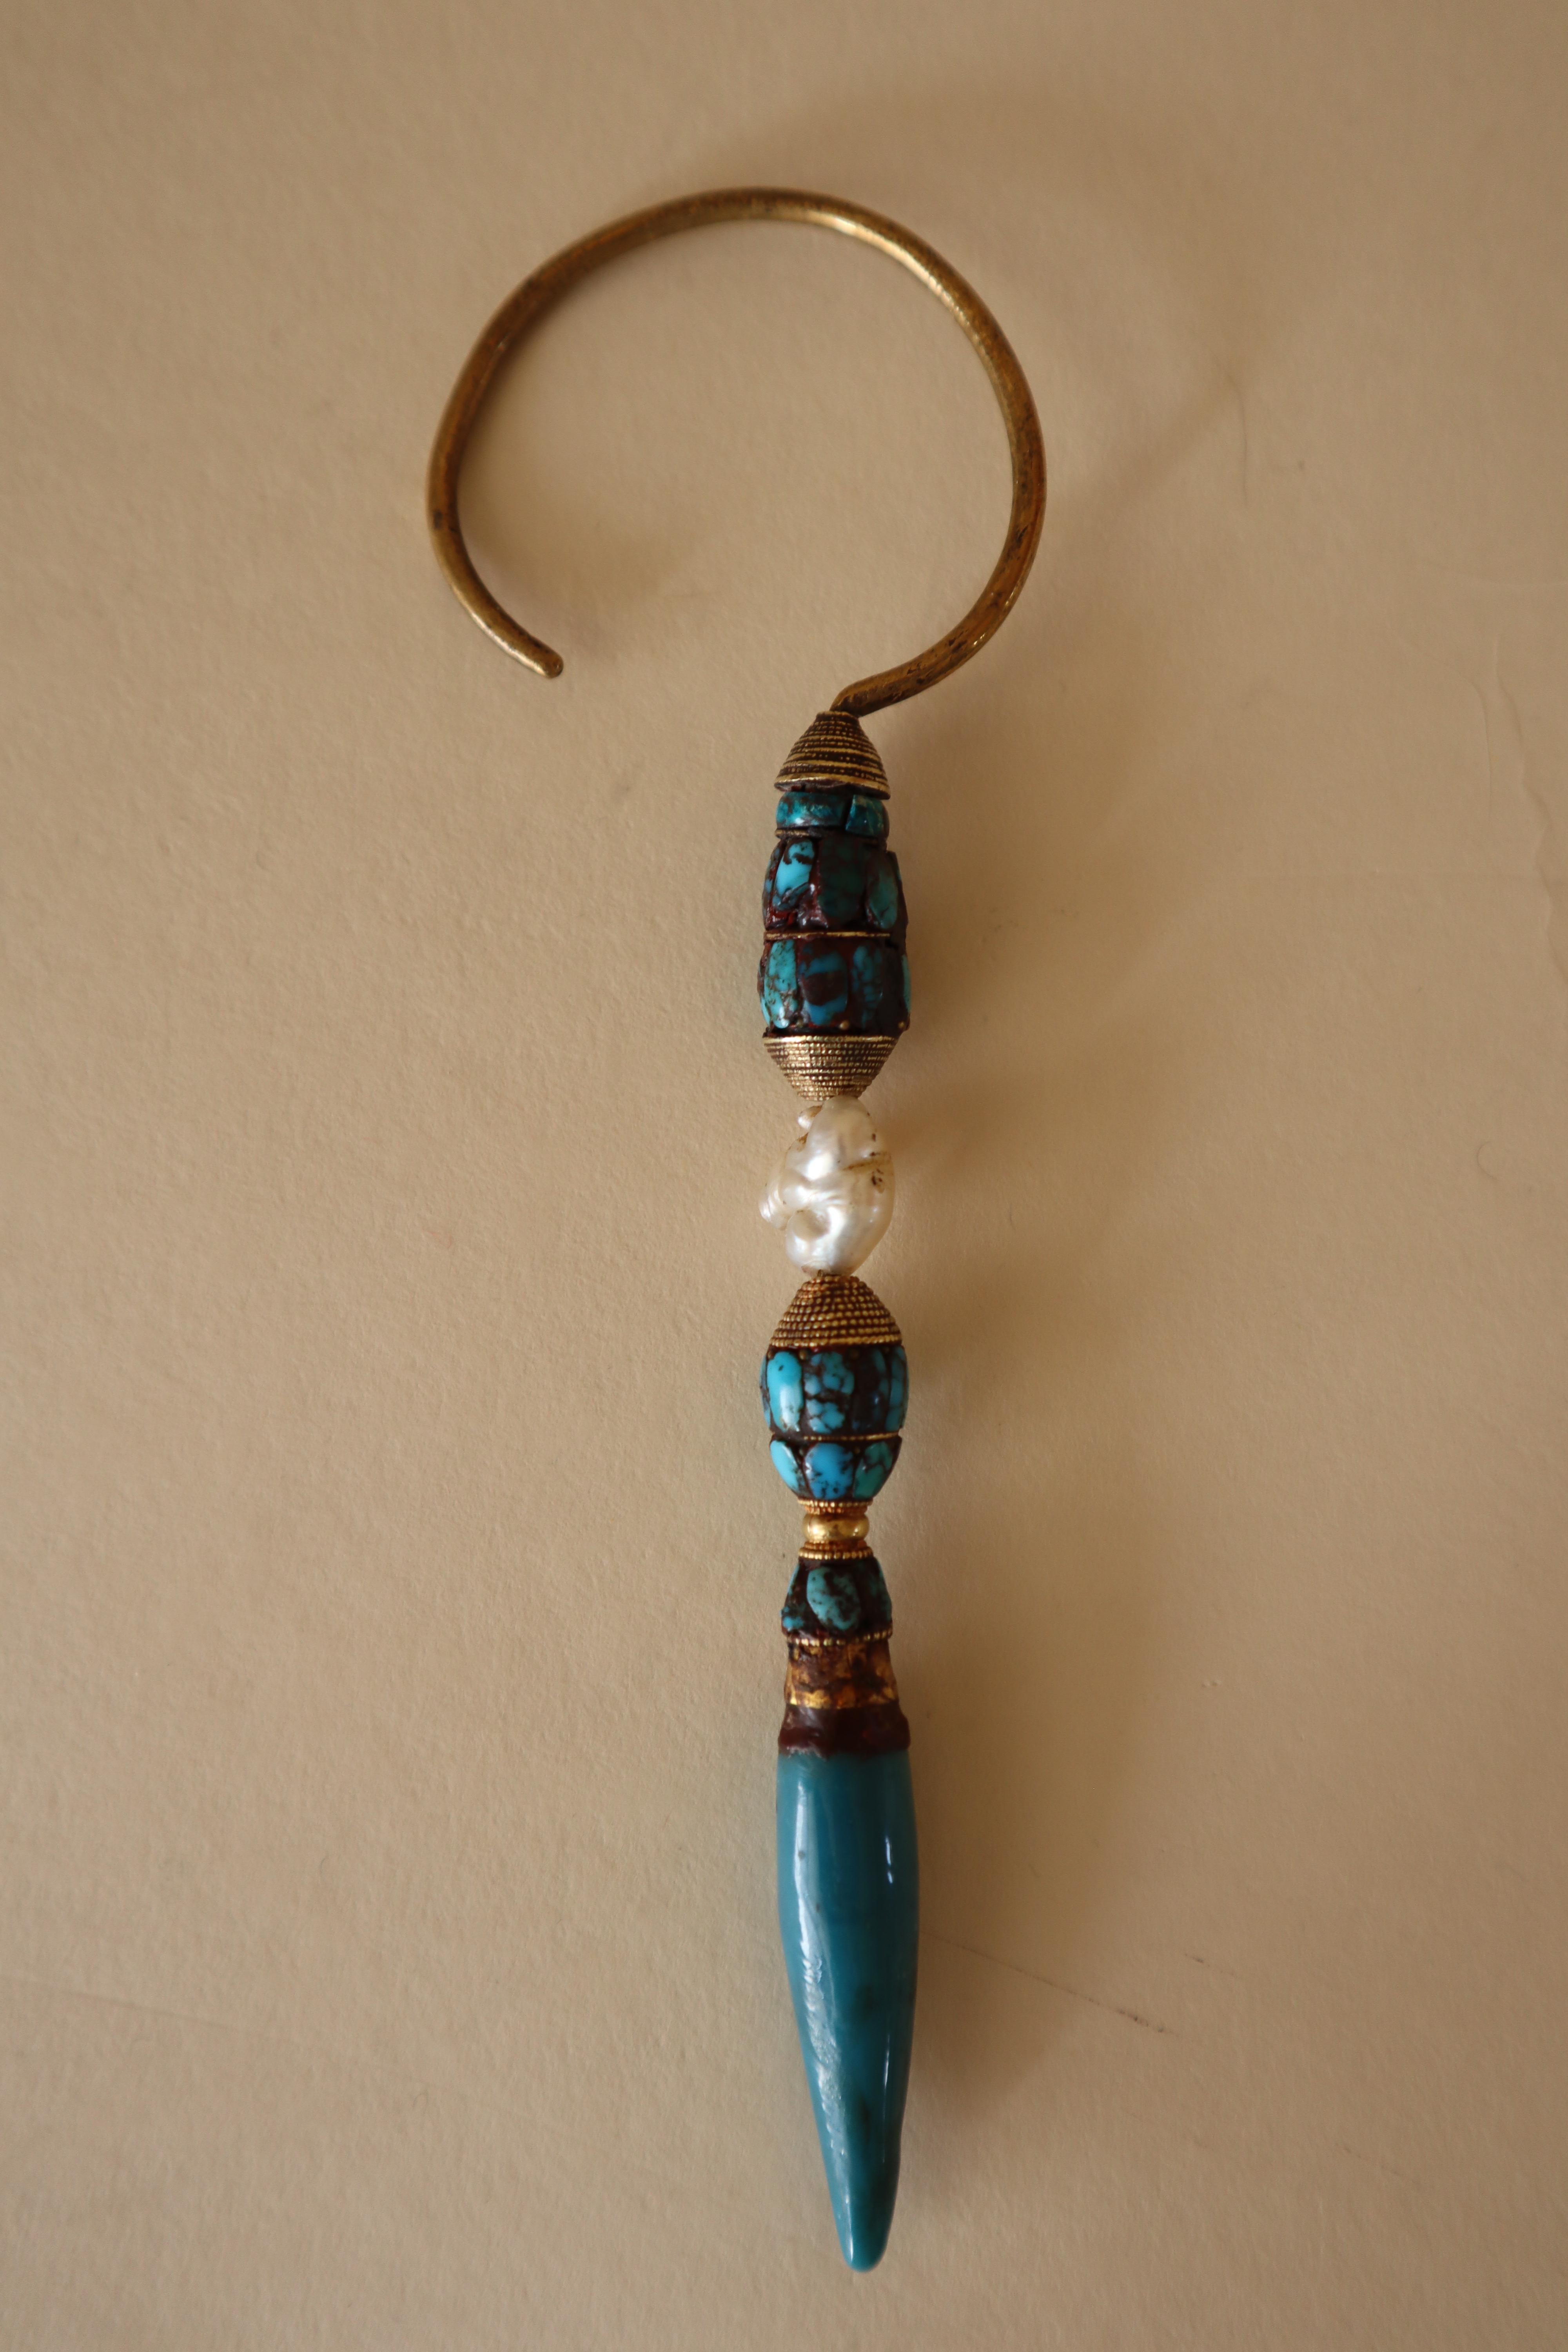 Store closing March 31. Last chance clearance sale.  This magnificent, pencil-like ear ornament is made from a 14-karat gold hoop (tested) and beaded gold wire, gold sheet, a single pearl, turquoise pieces, and a long turquoise-colored glass